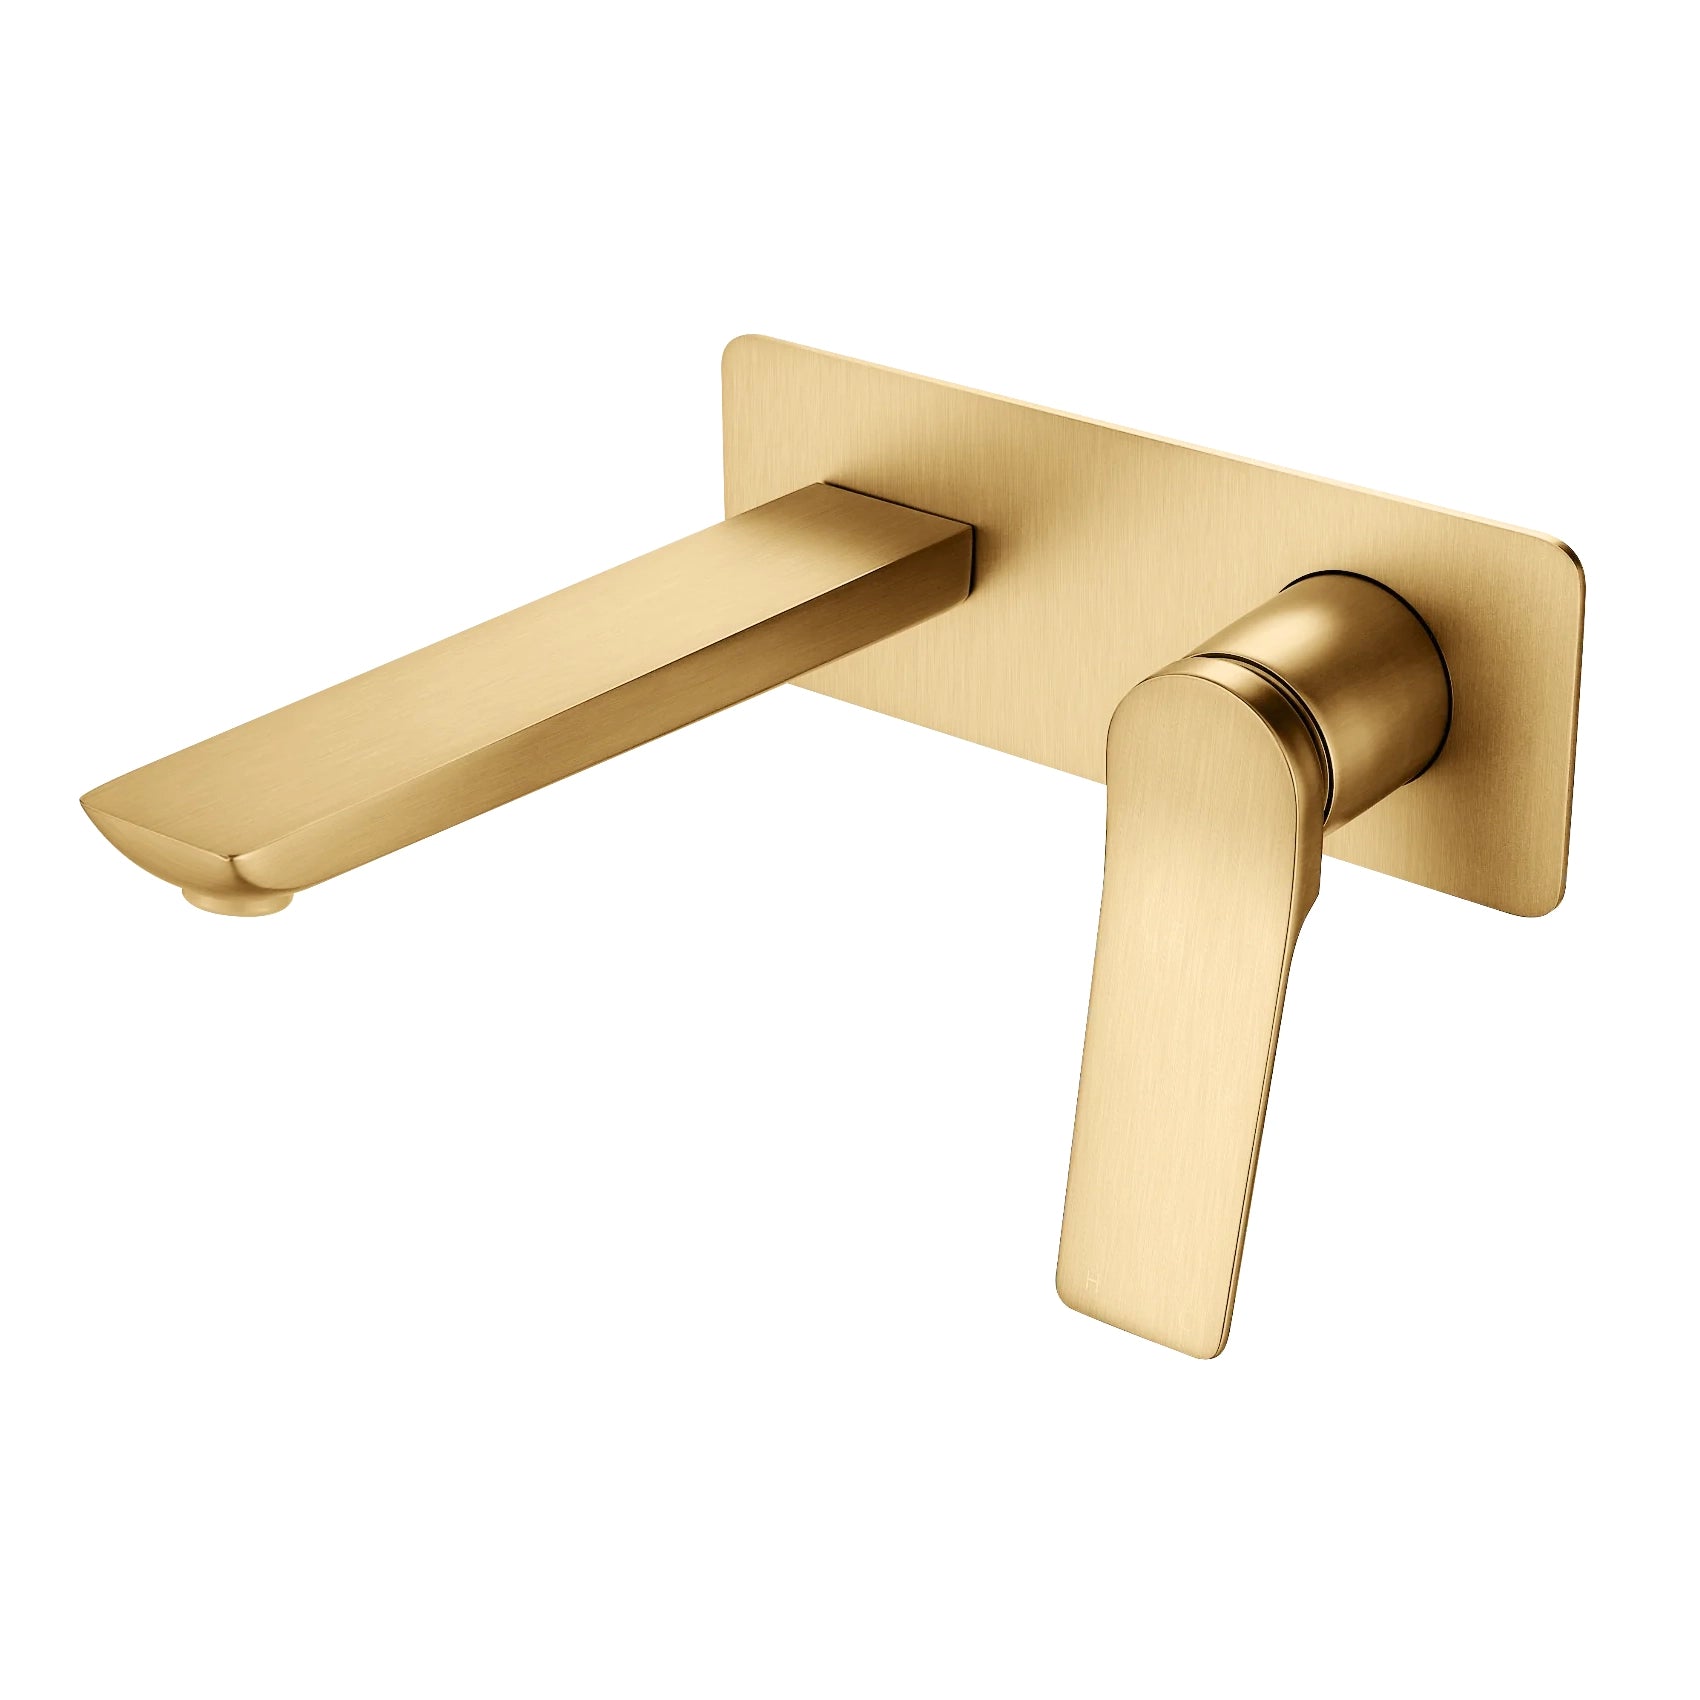 Rushy Series Square brushed yellow gold wall mixer with spout in Color Up design, featuring an extension for added convenience-BUYG0153-2-EX.BM